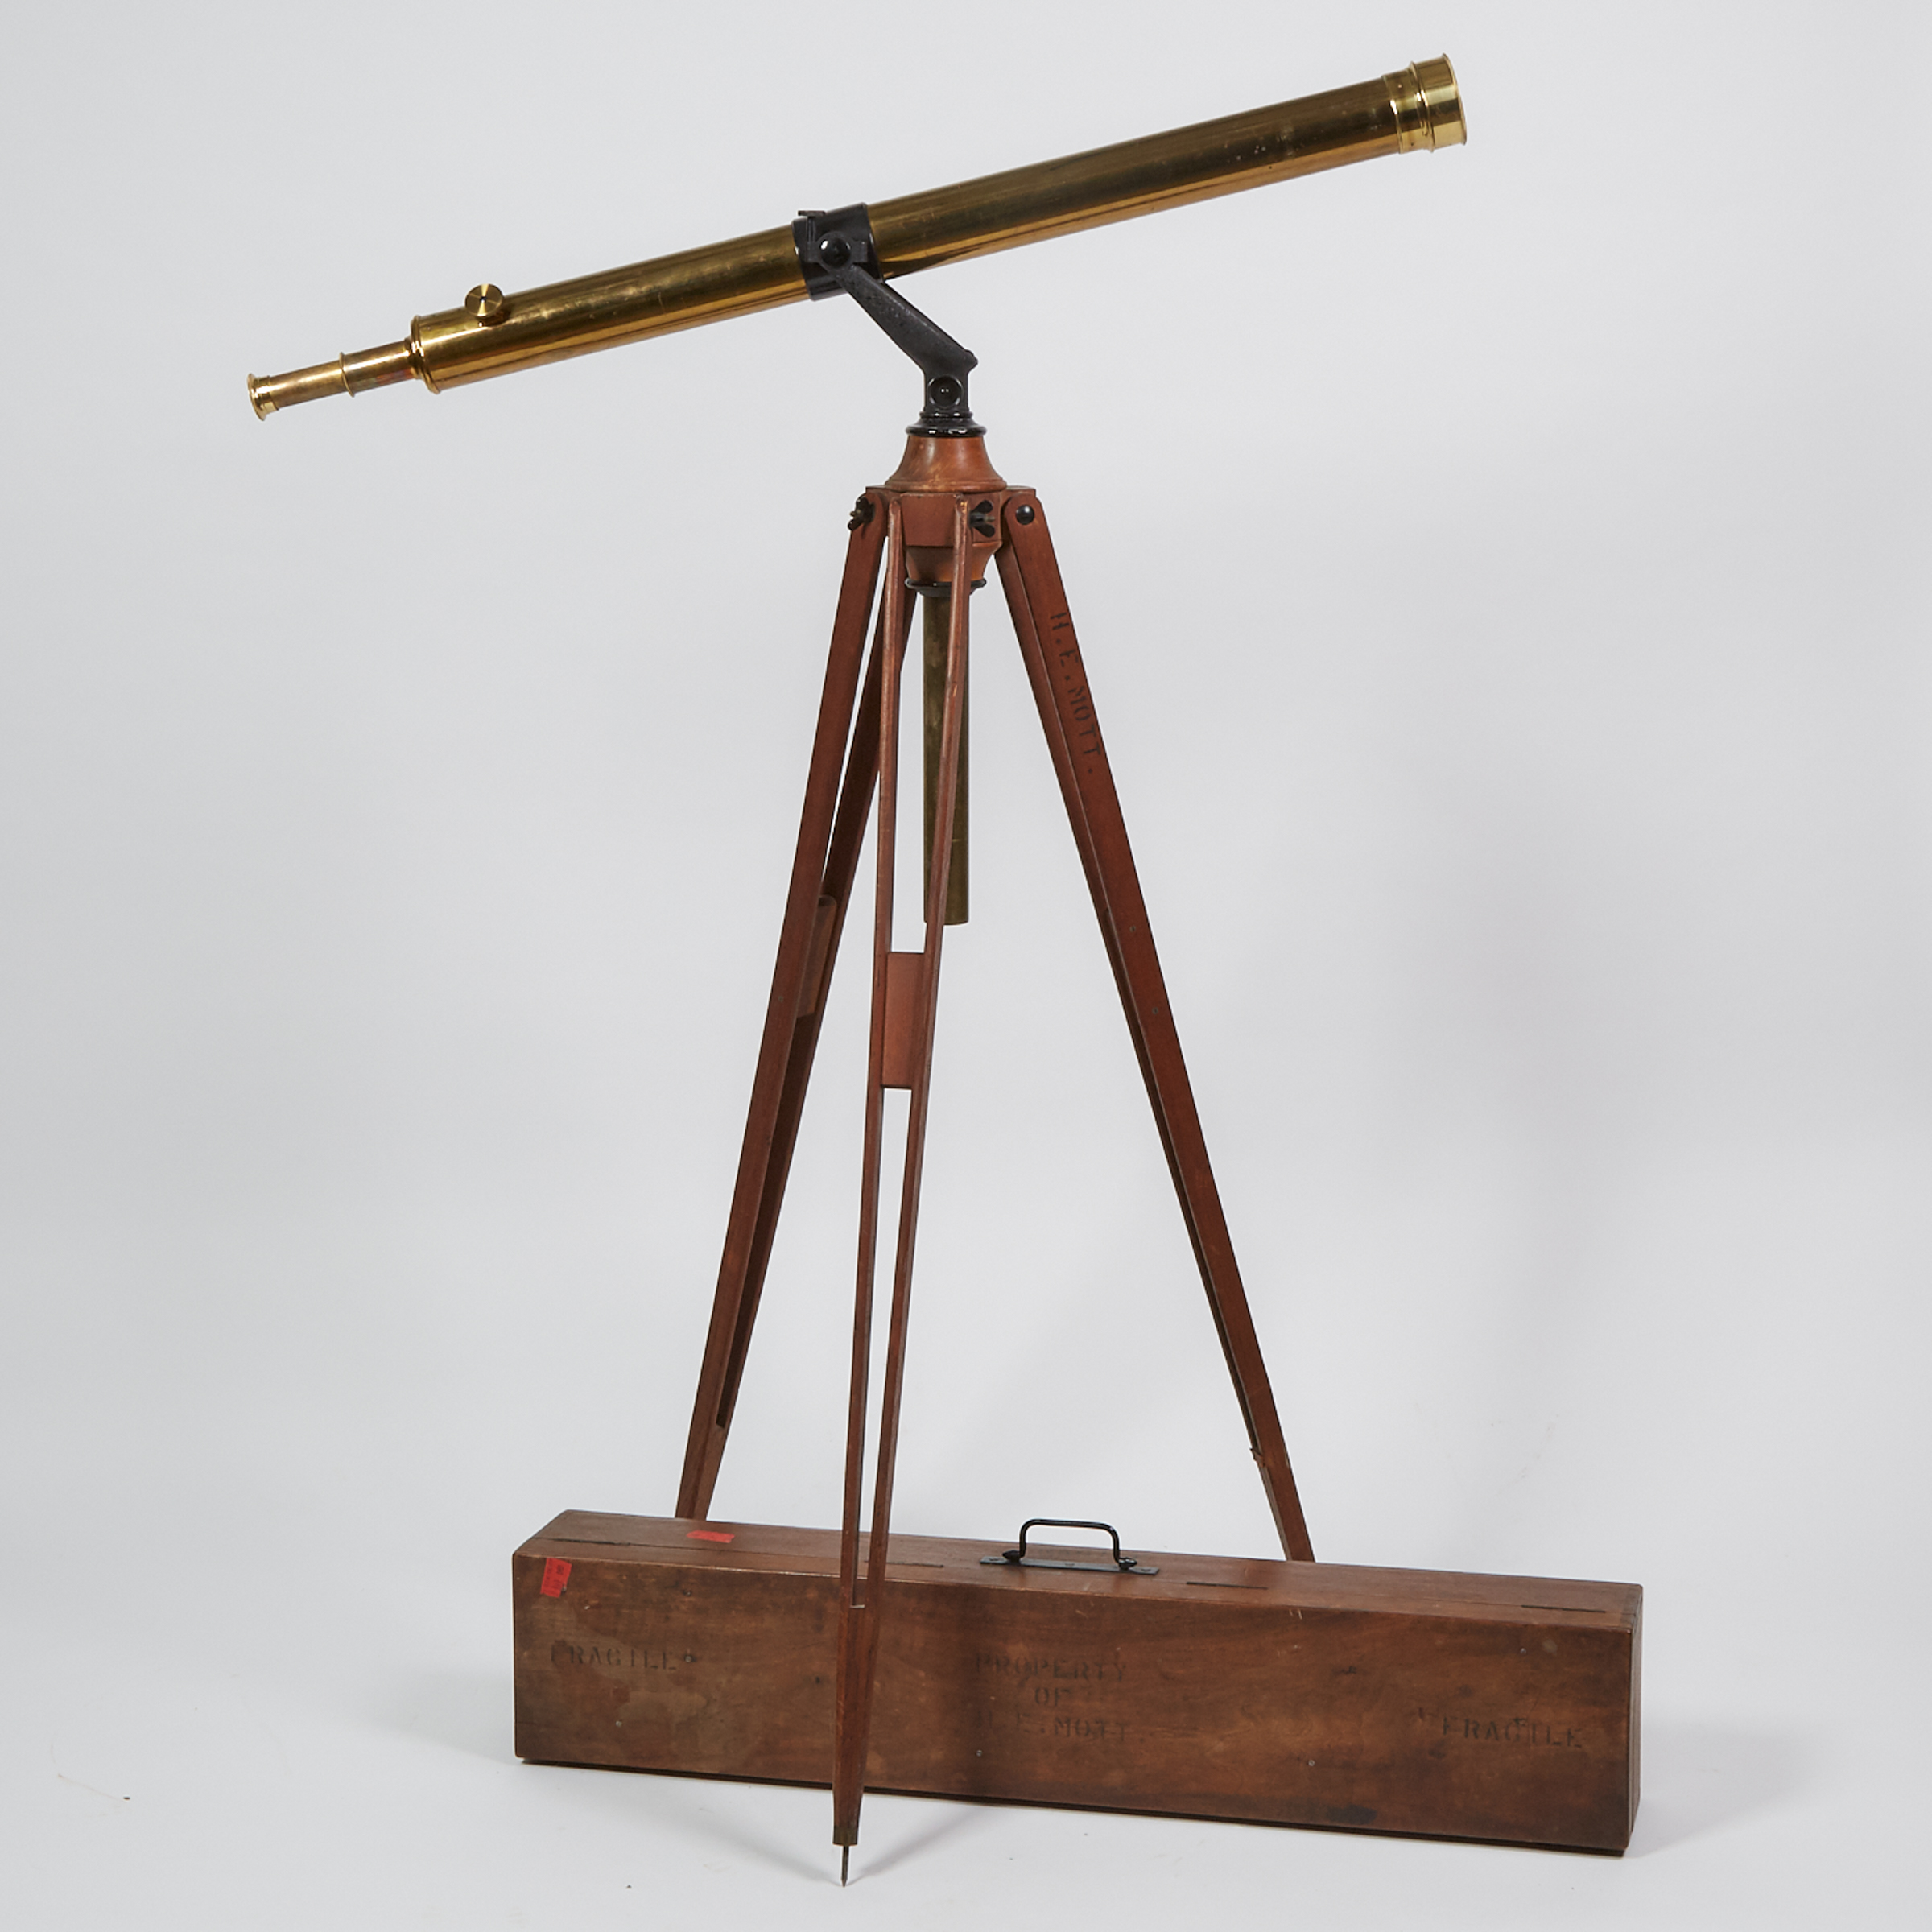 French Lacquered Brass Celestial Telescope on Tripod, E. Vion, Paris for Selsi Optics, early 20th century